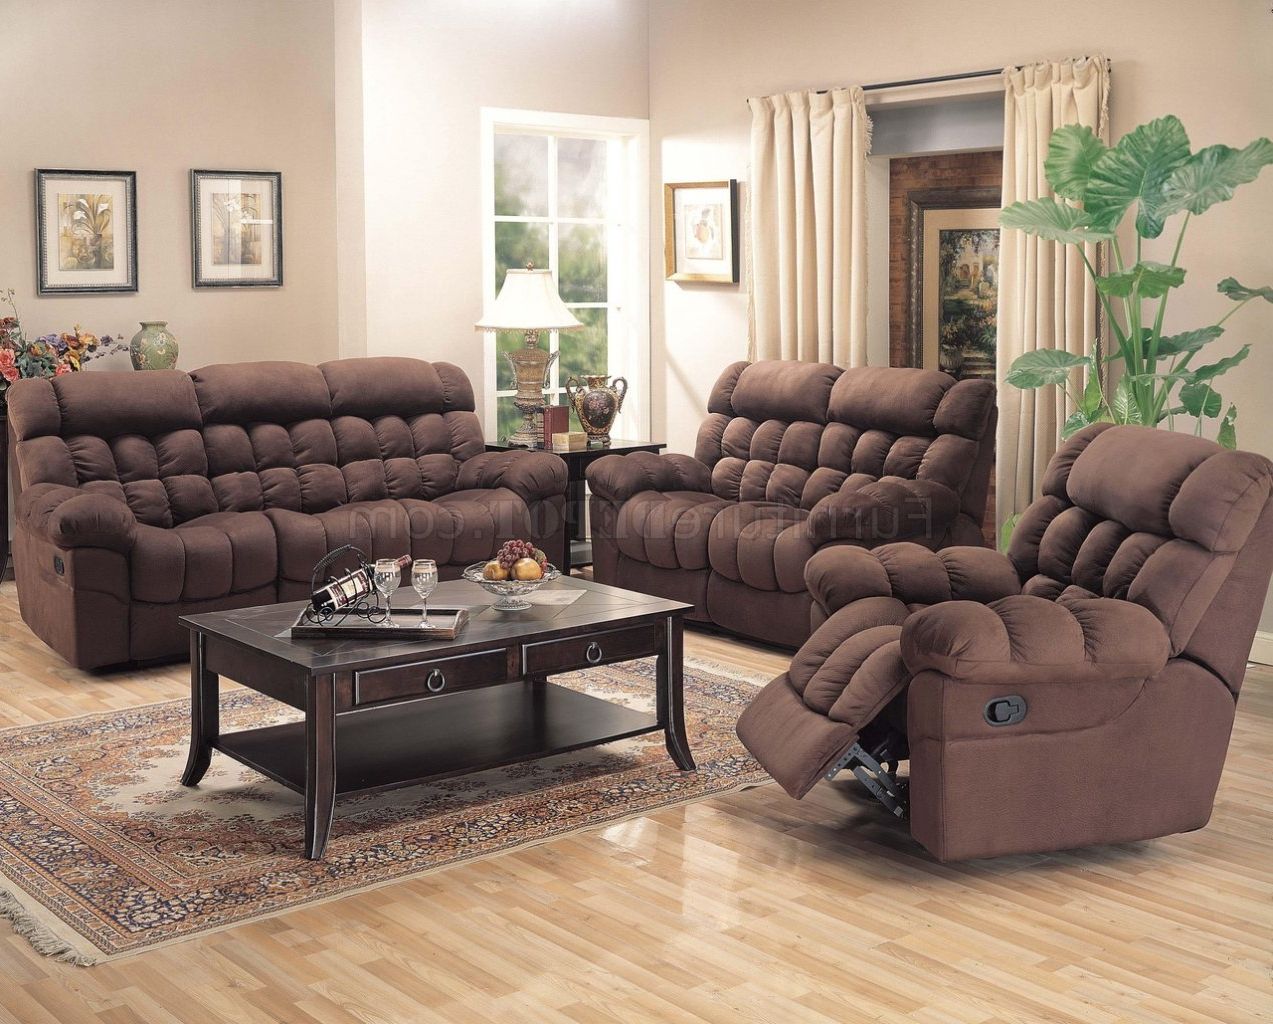 Chocolate Microfiber Modern Reclining Living Room Sofa W/options With Regard To Famous 2 Tone Chocolate Microfiber Sofas (View 8 of 15)